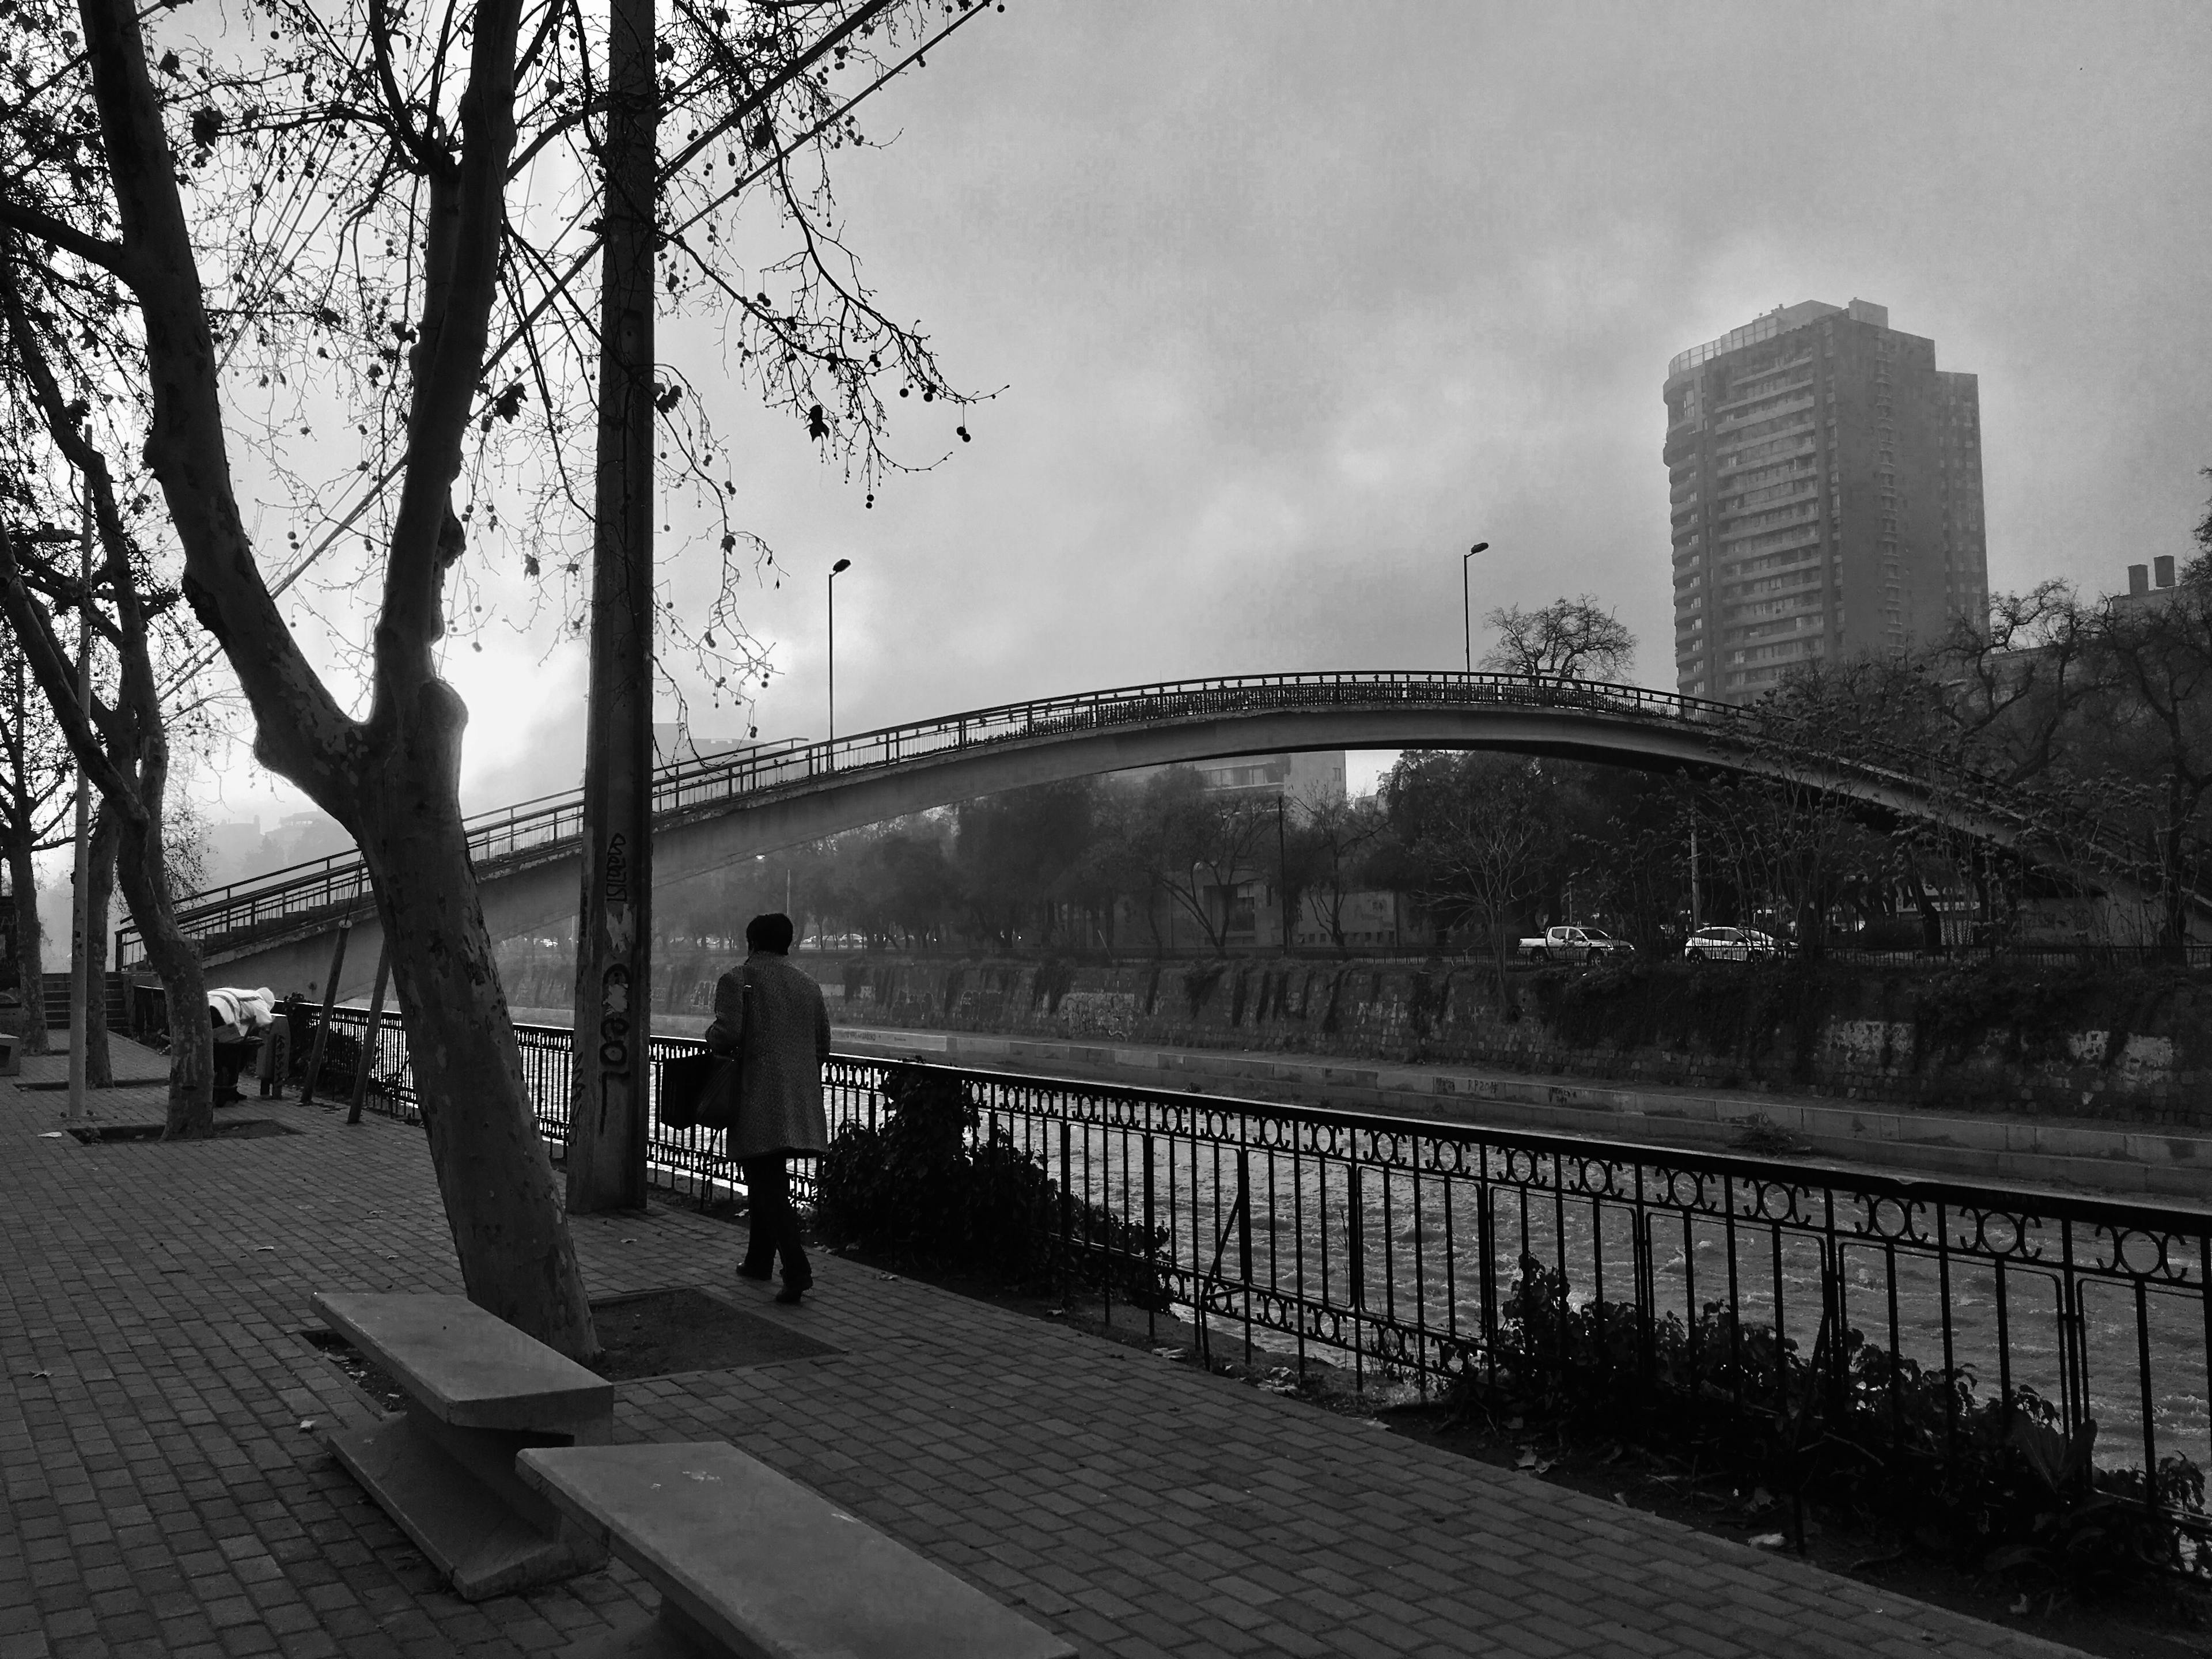 Low contrast, black and white image of a woman walking by the Mapocho river. The day is cloudy and the sidewalk is empty. The lighting of the image gives a nostalgic and melancholic feel.